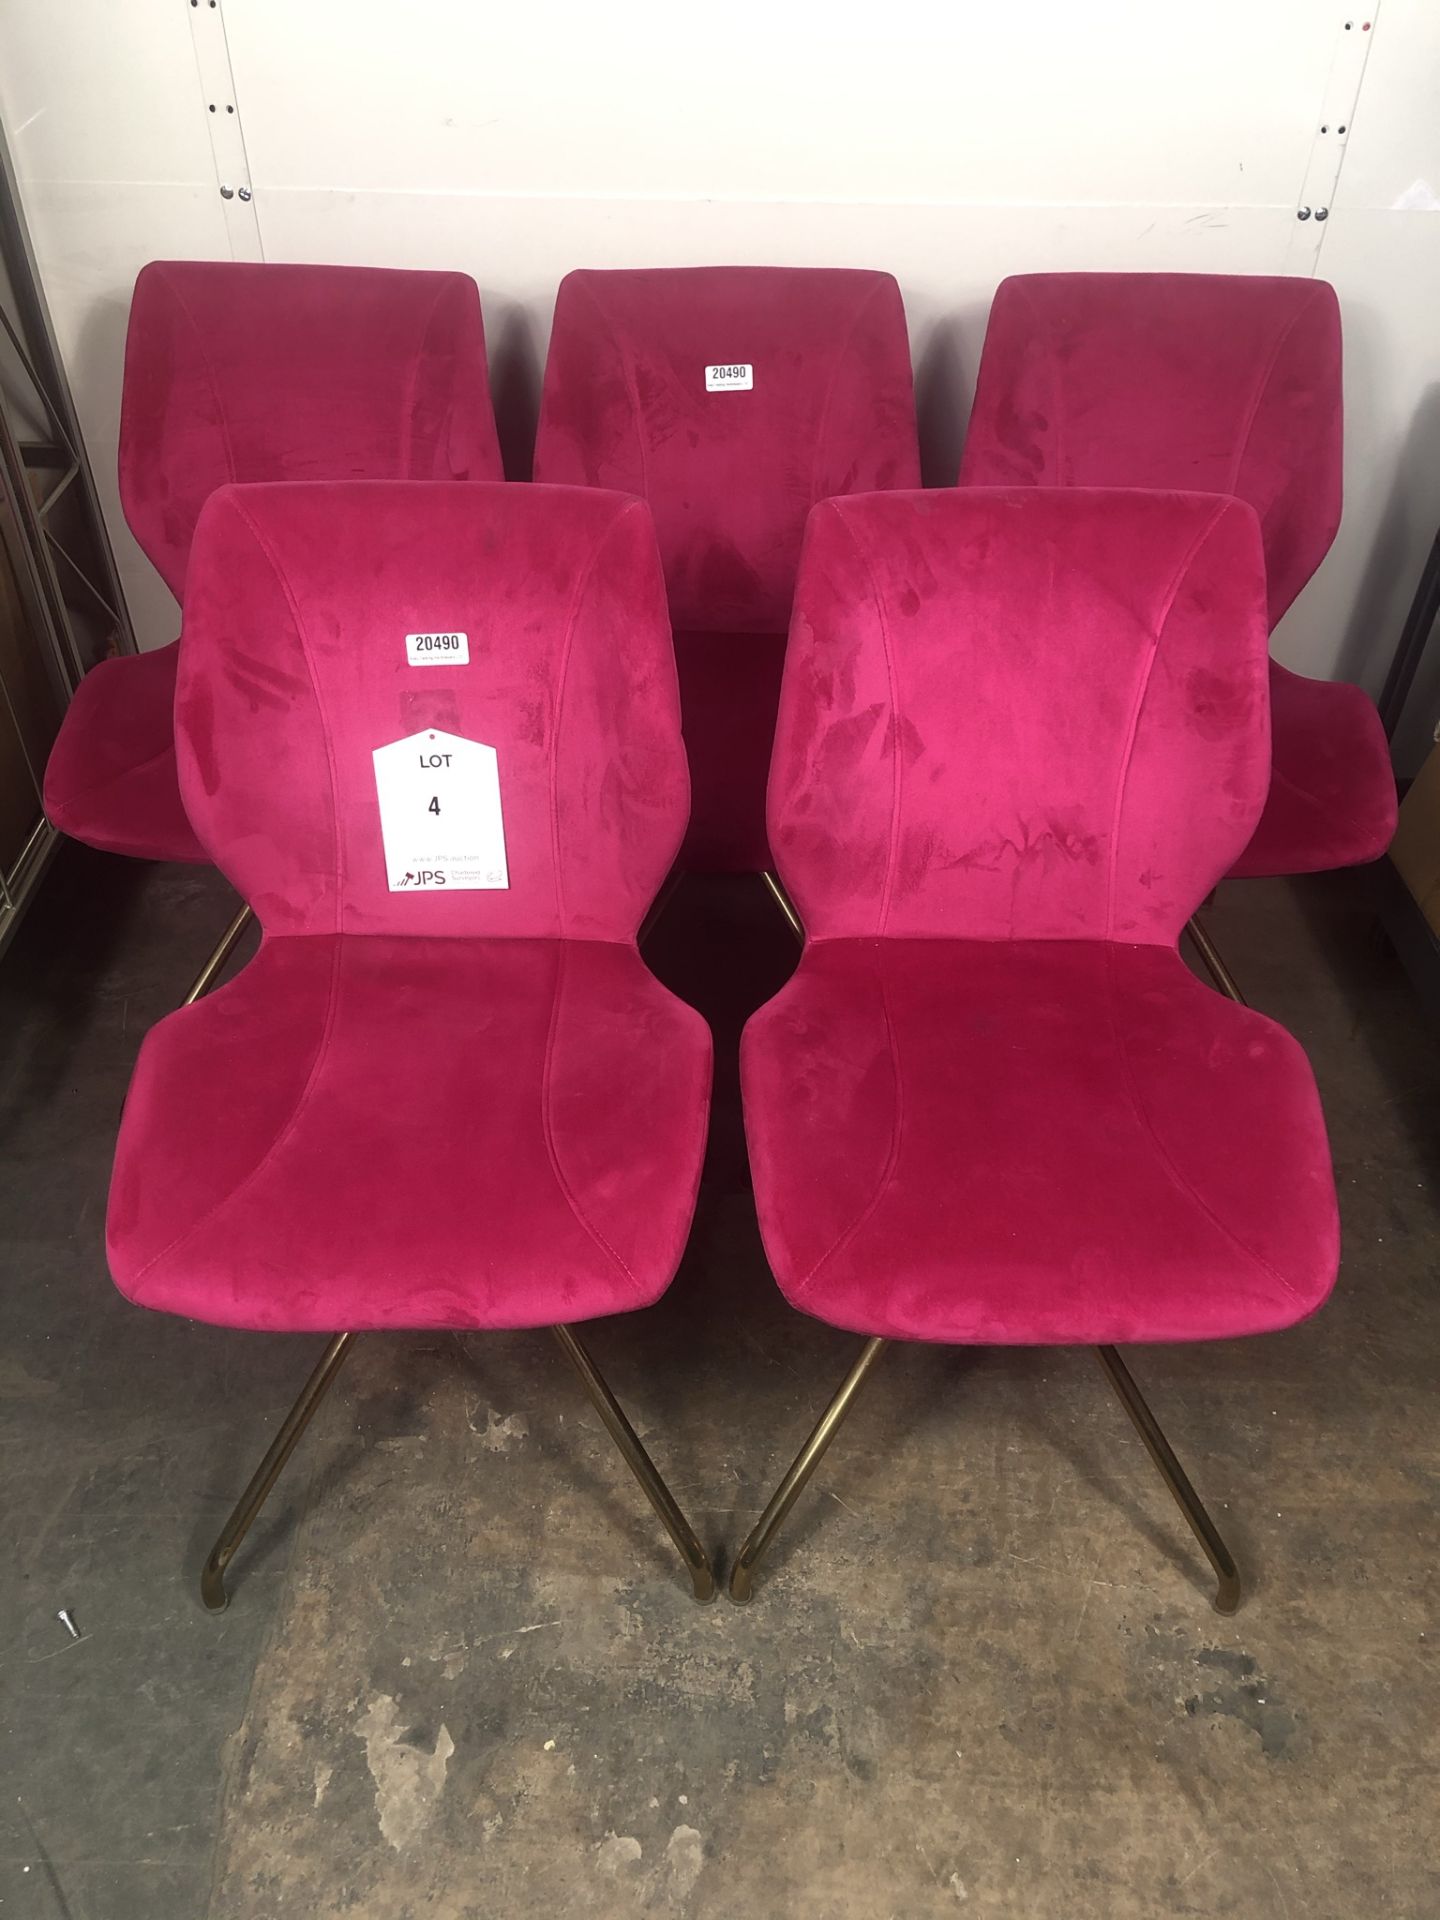 5 x Faux Suede Make-up/Stylist Chairs in Pink